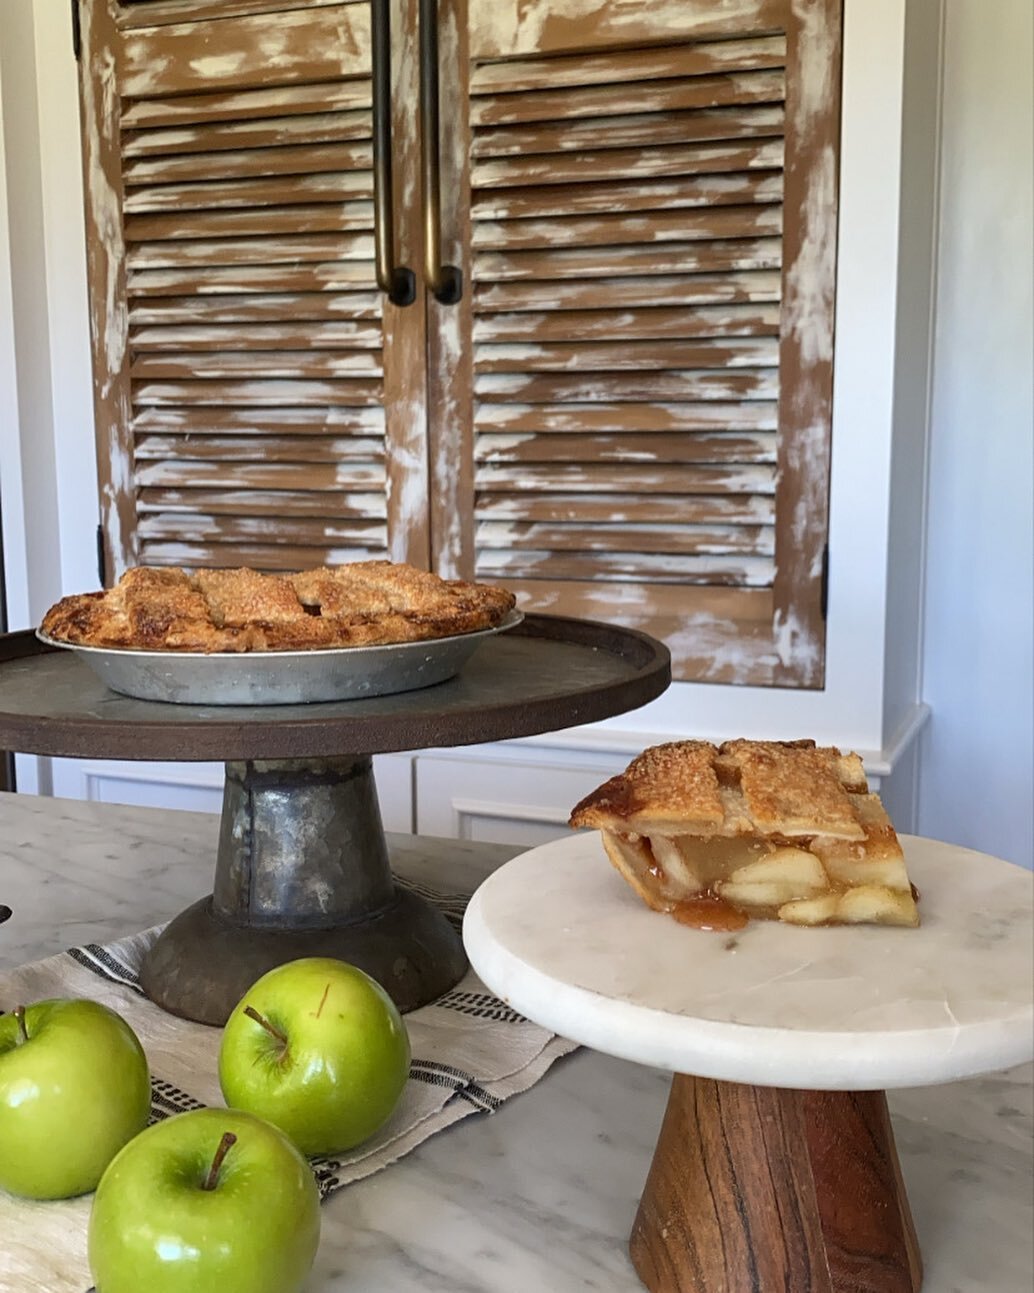 Welcome in the fall season with one of our tasty apple pies! Made fresh daily with local Granny Smith apples 🍏

#pie #localpie #MoPie #MoPieCo #asliceabove #giveMolove #giveMopies #buylocal #dessert #KansasCity #baking #bakingfromscratch #instagood 